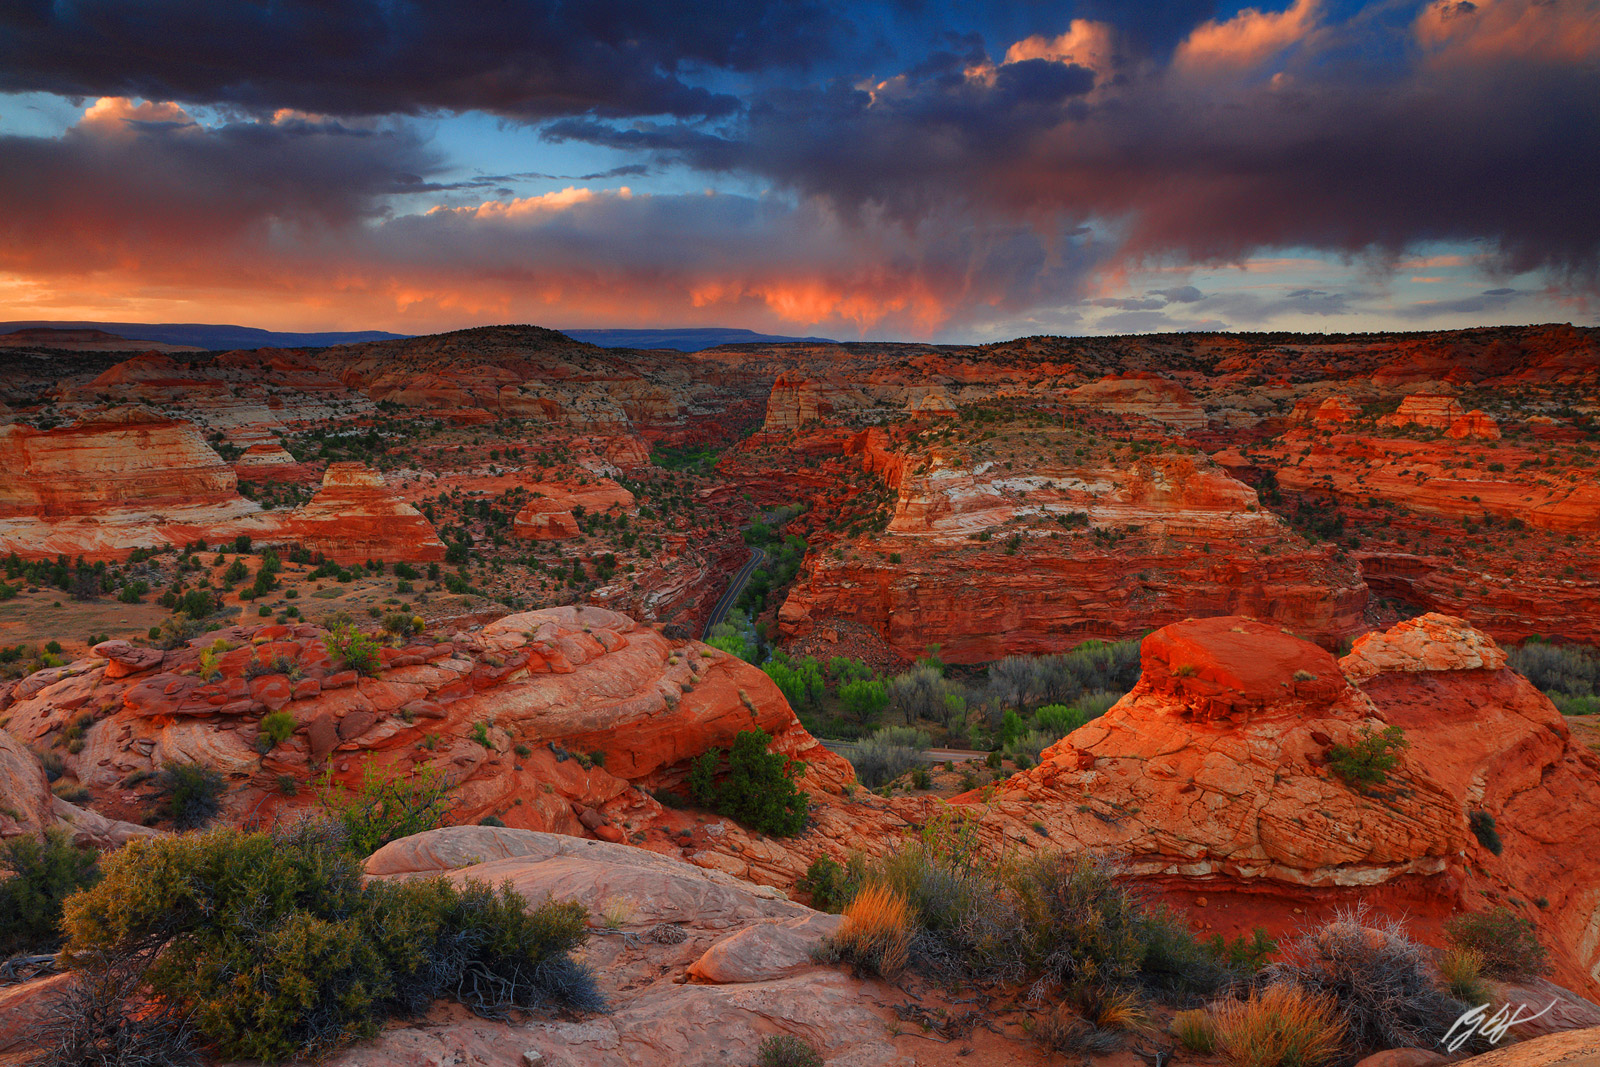 Sunset over Escalante Canyon in Grand Staircase-Escalante National Monument in Utah